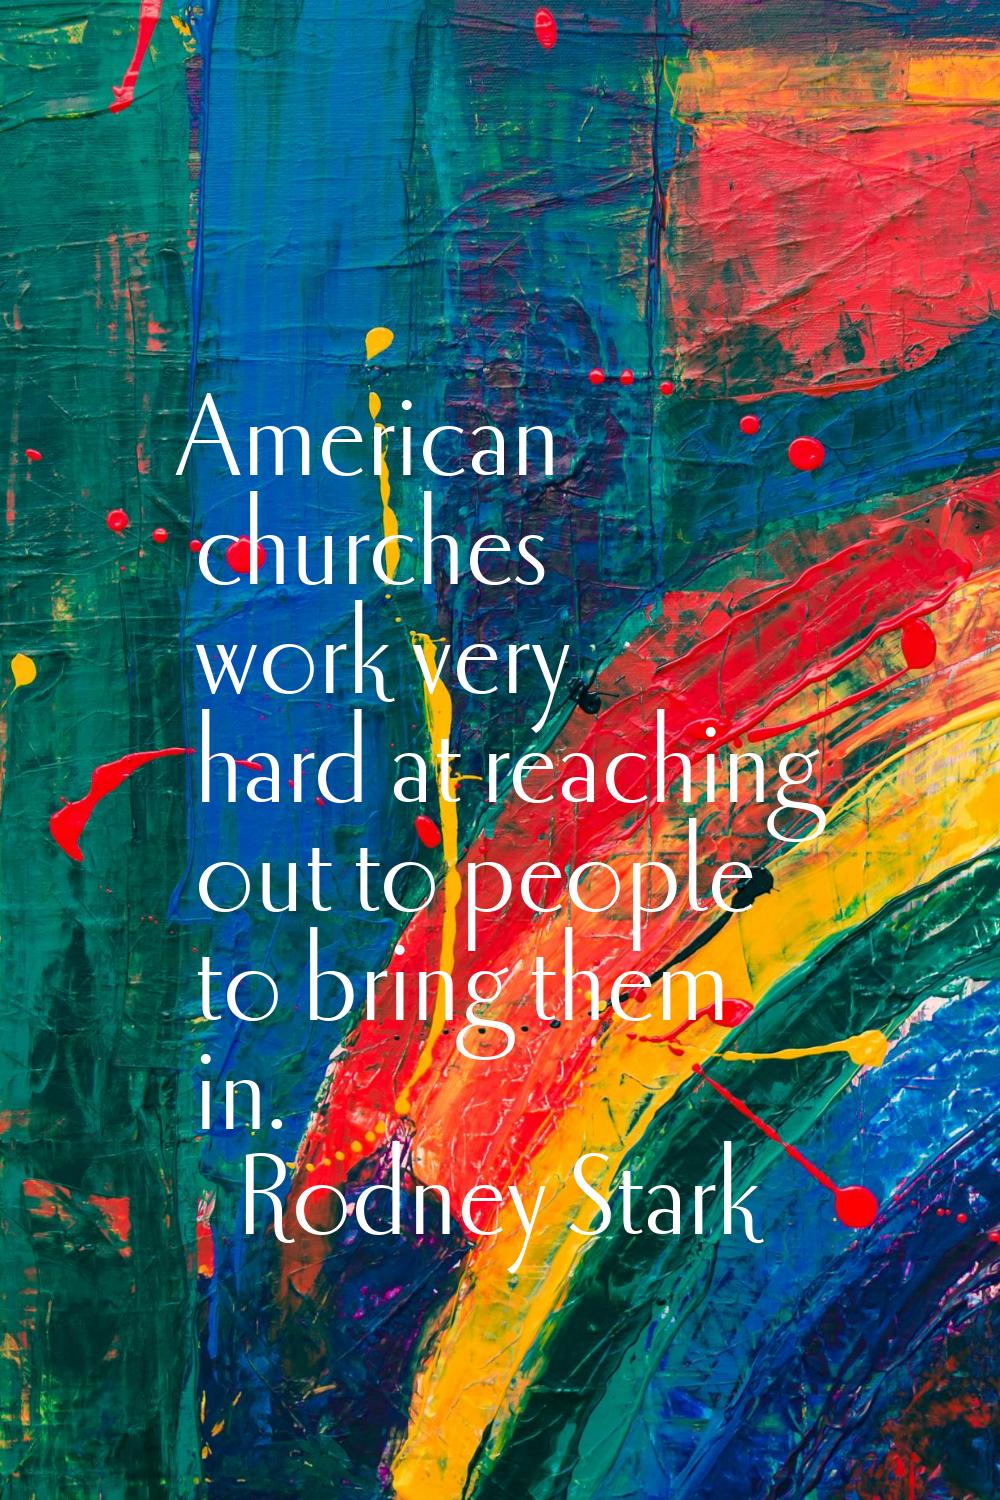 American churches work very hard at reaching out to people to bring them in.